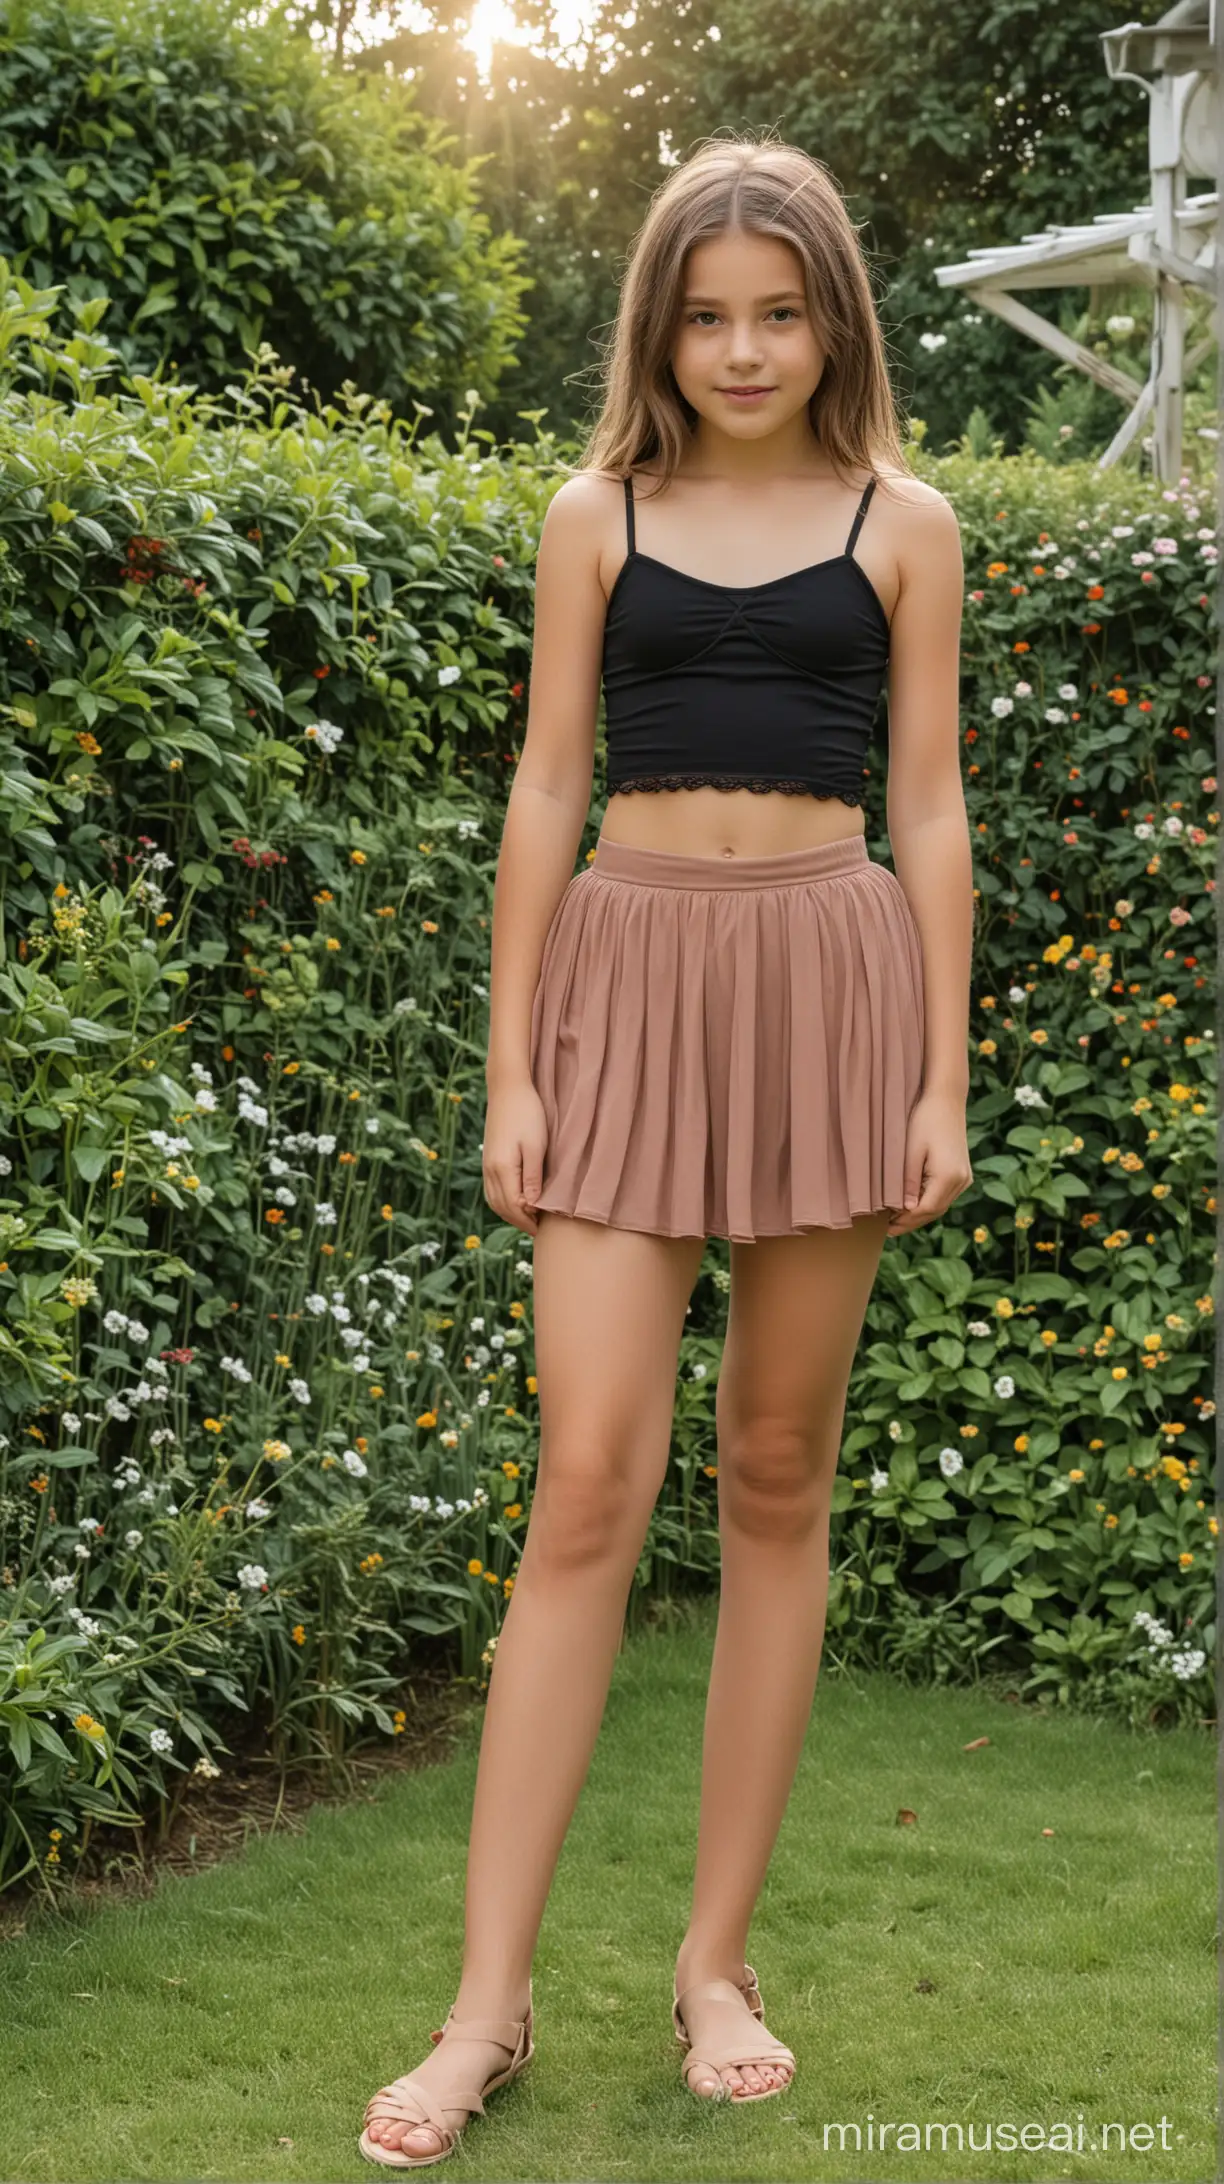 12 years old girl, wearing strappy crop camisole with flowy mini skirt, in garden